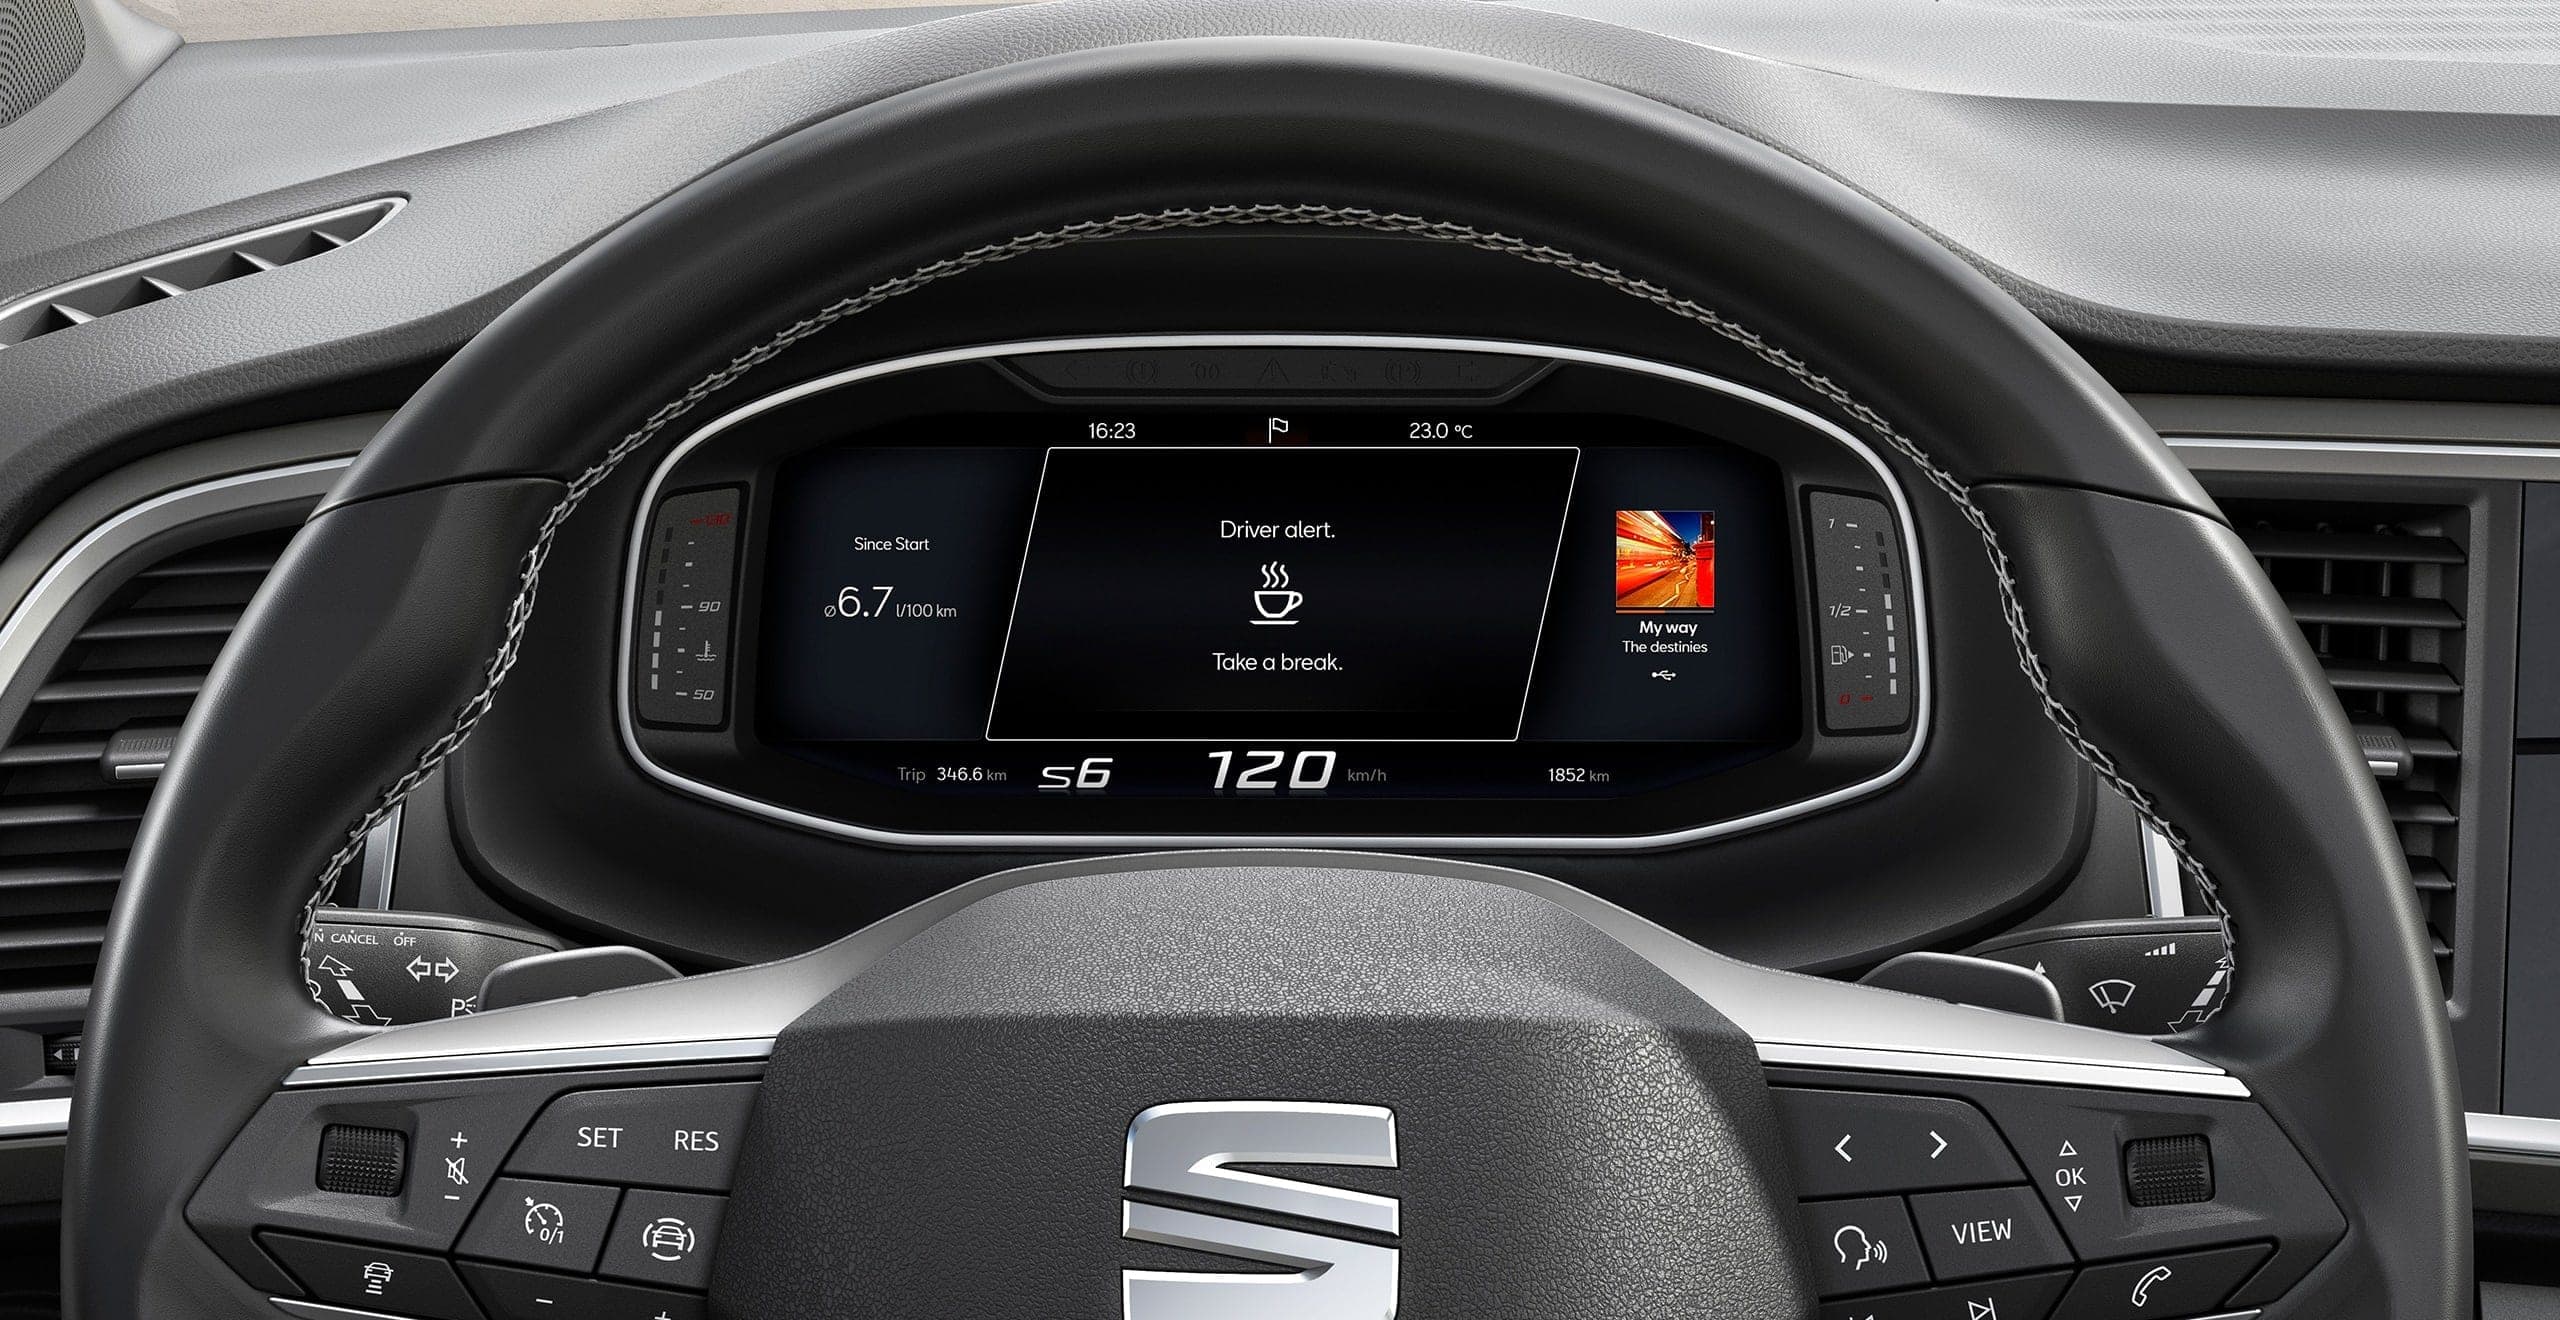 SEAT Ateca SUV detailed view of digital cockpit using navigation system